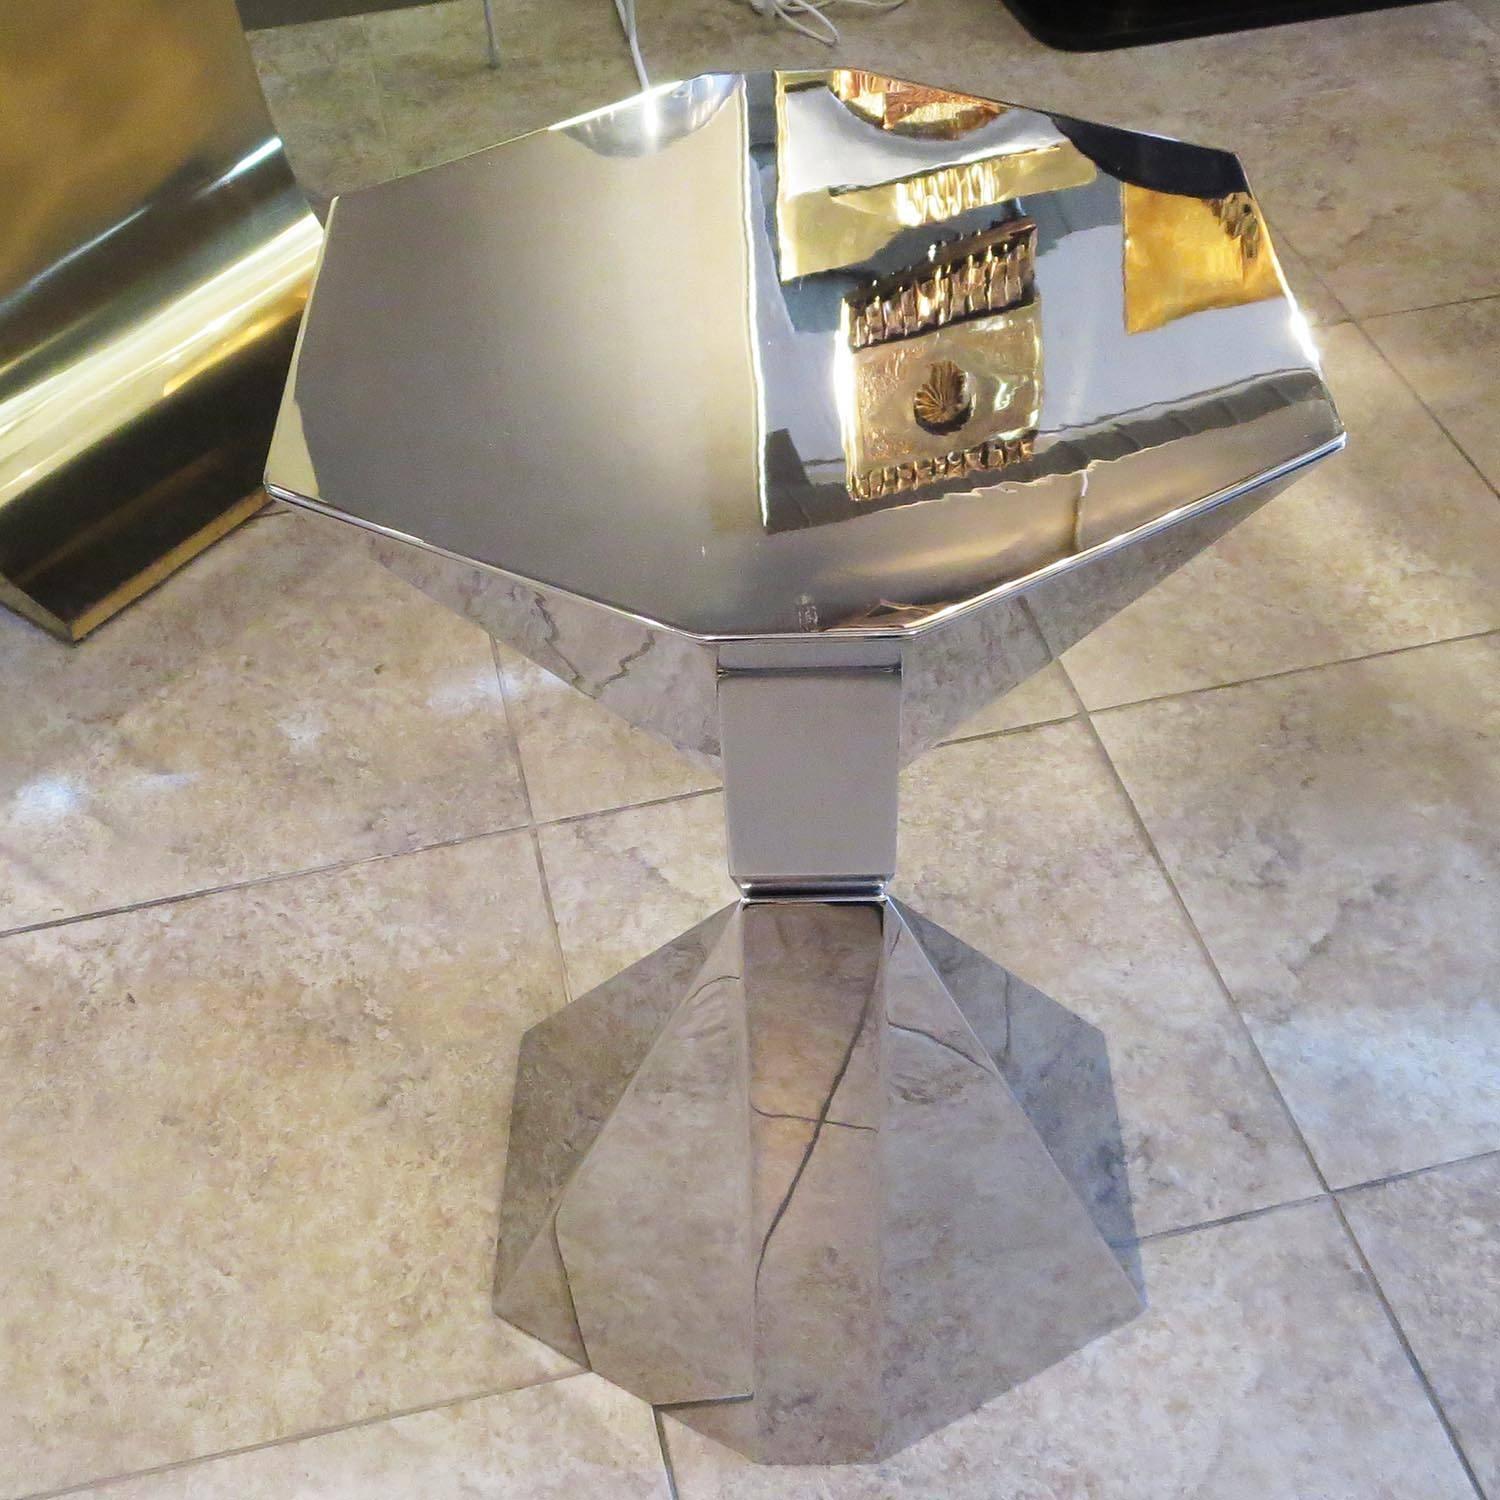 Polished Cubist Pedestal or Side Table in Mirrored Stainless Steel